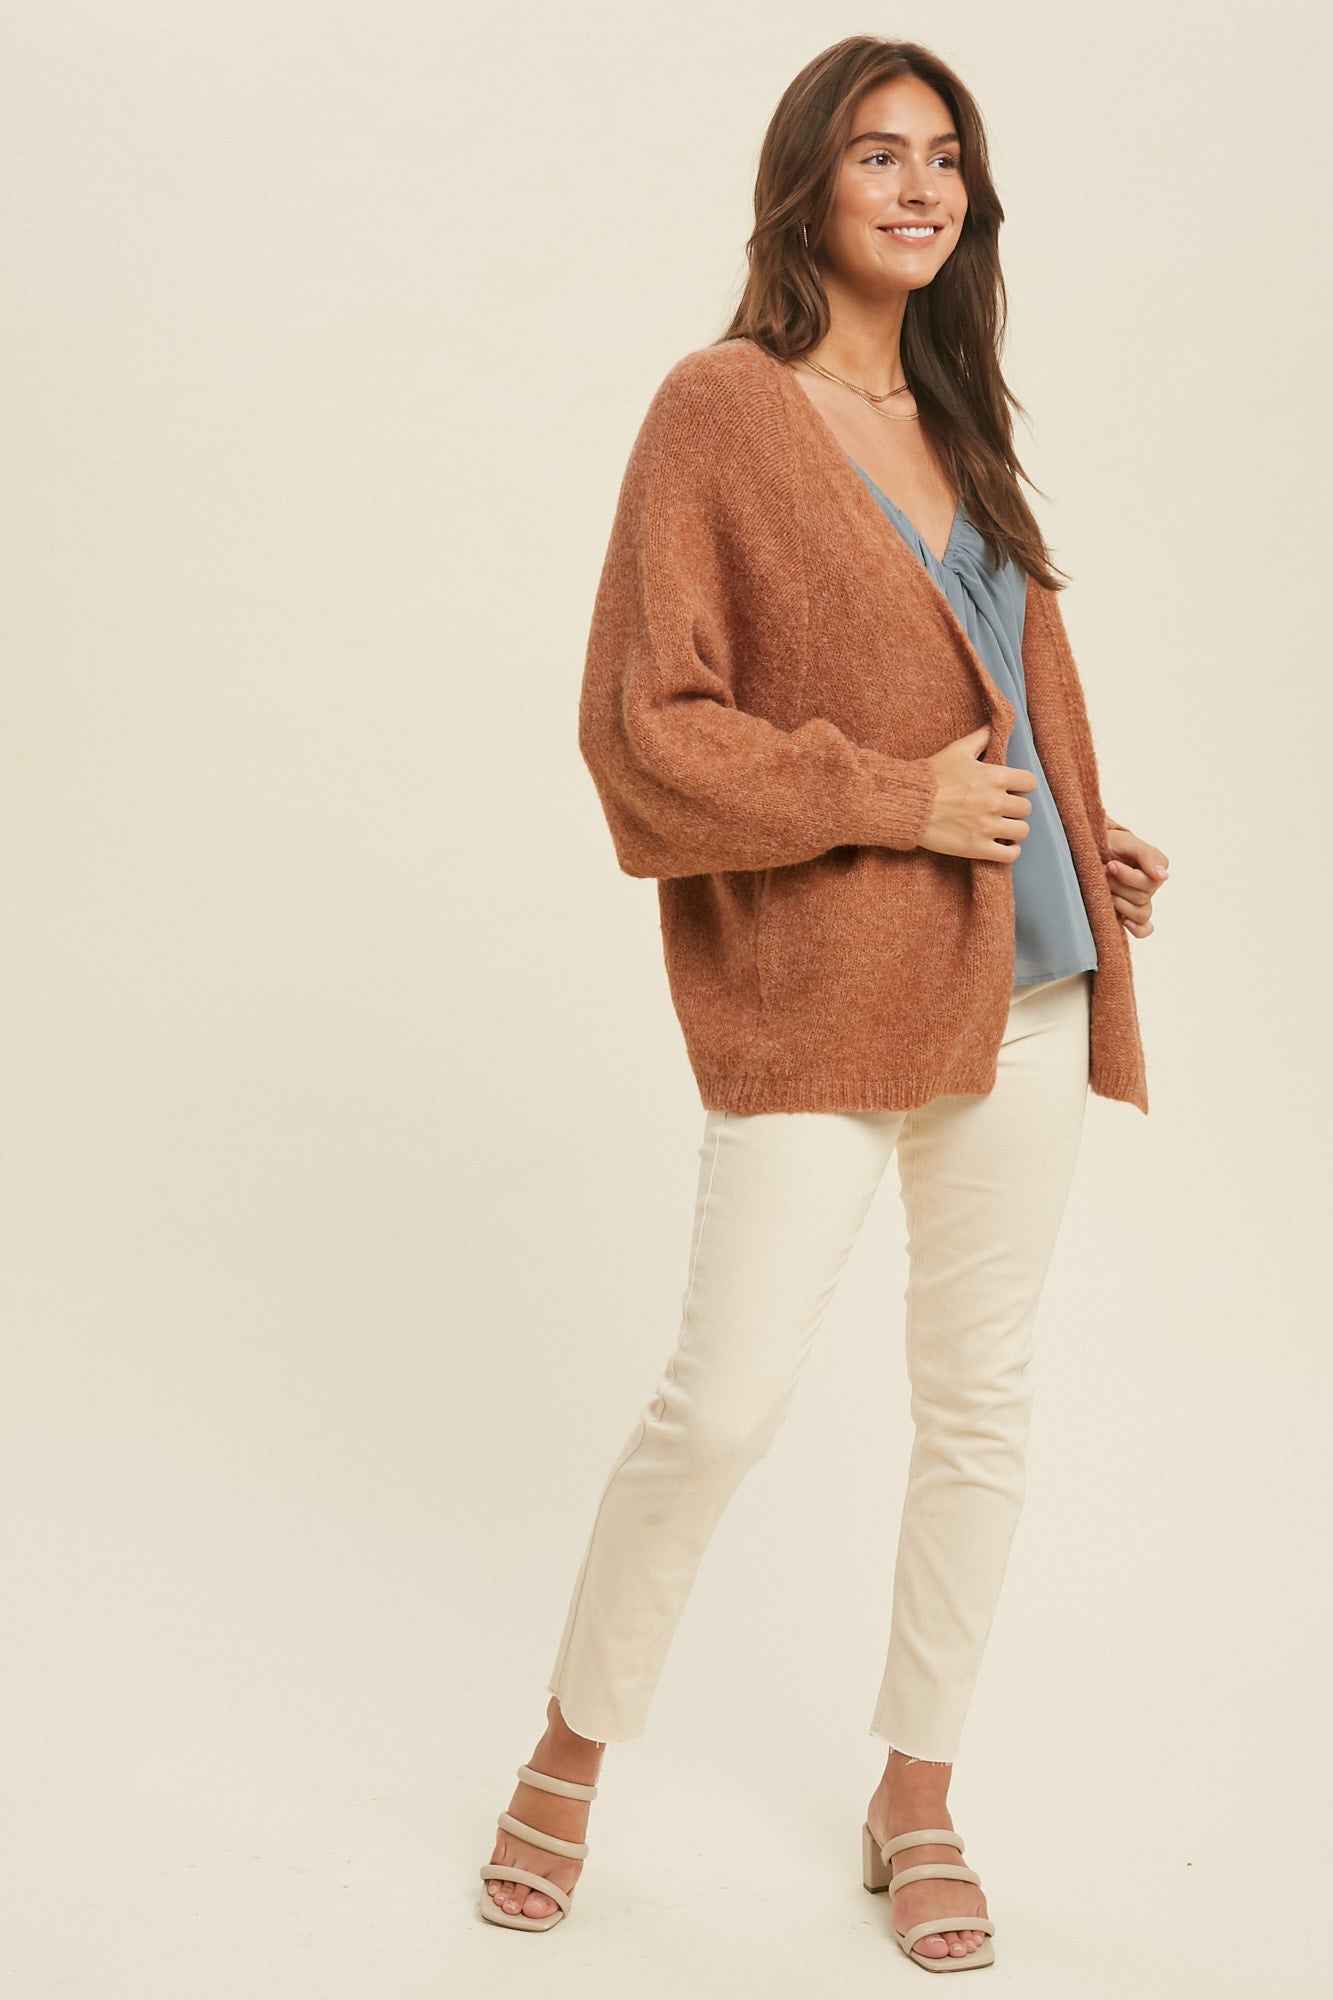 Brushed Knit Open Front Cardigan by Wishlist.